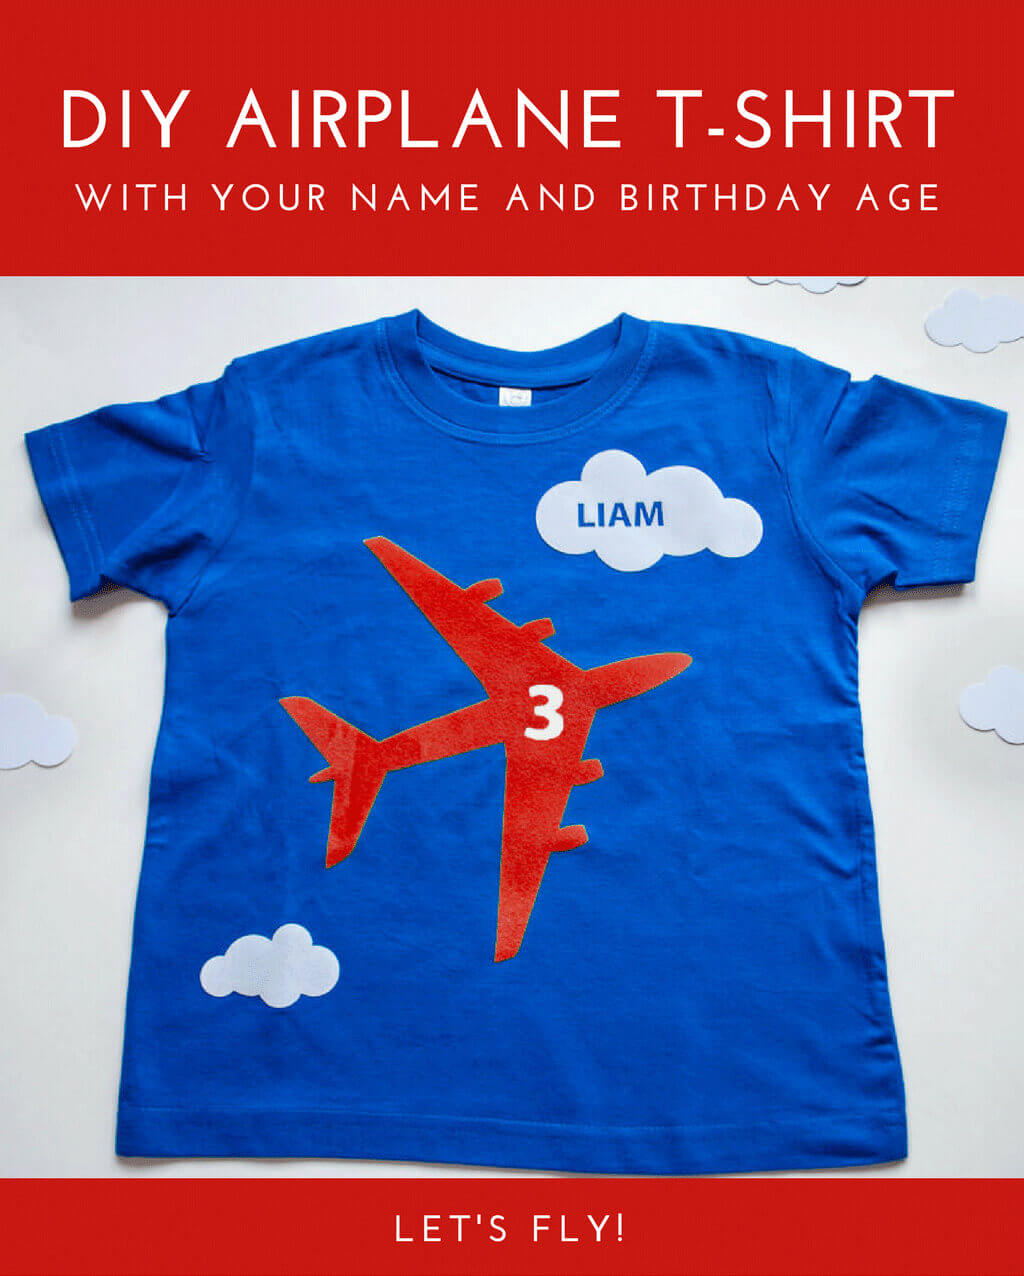 Kid's red and blue airplane birthday t-shirt personalized with name and age for an airplane birthday party